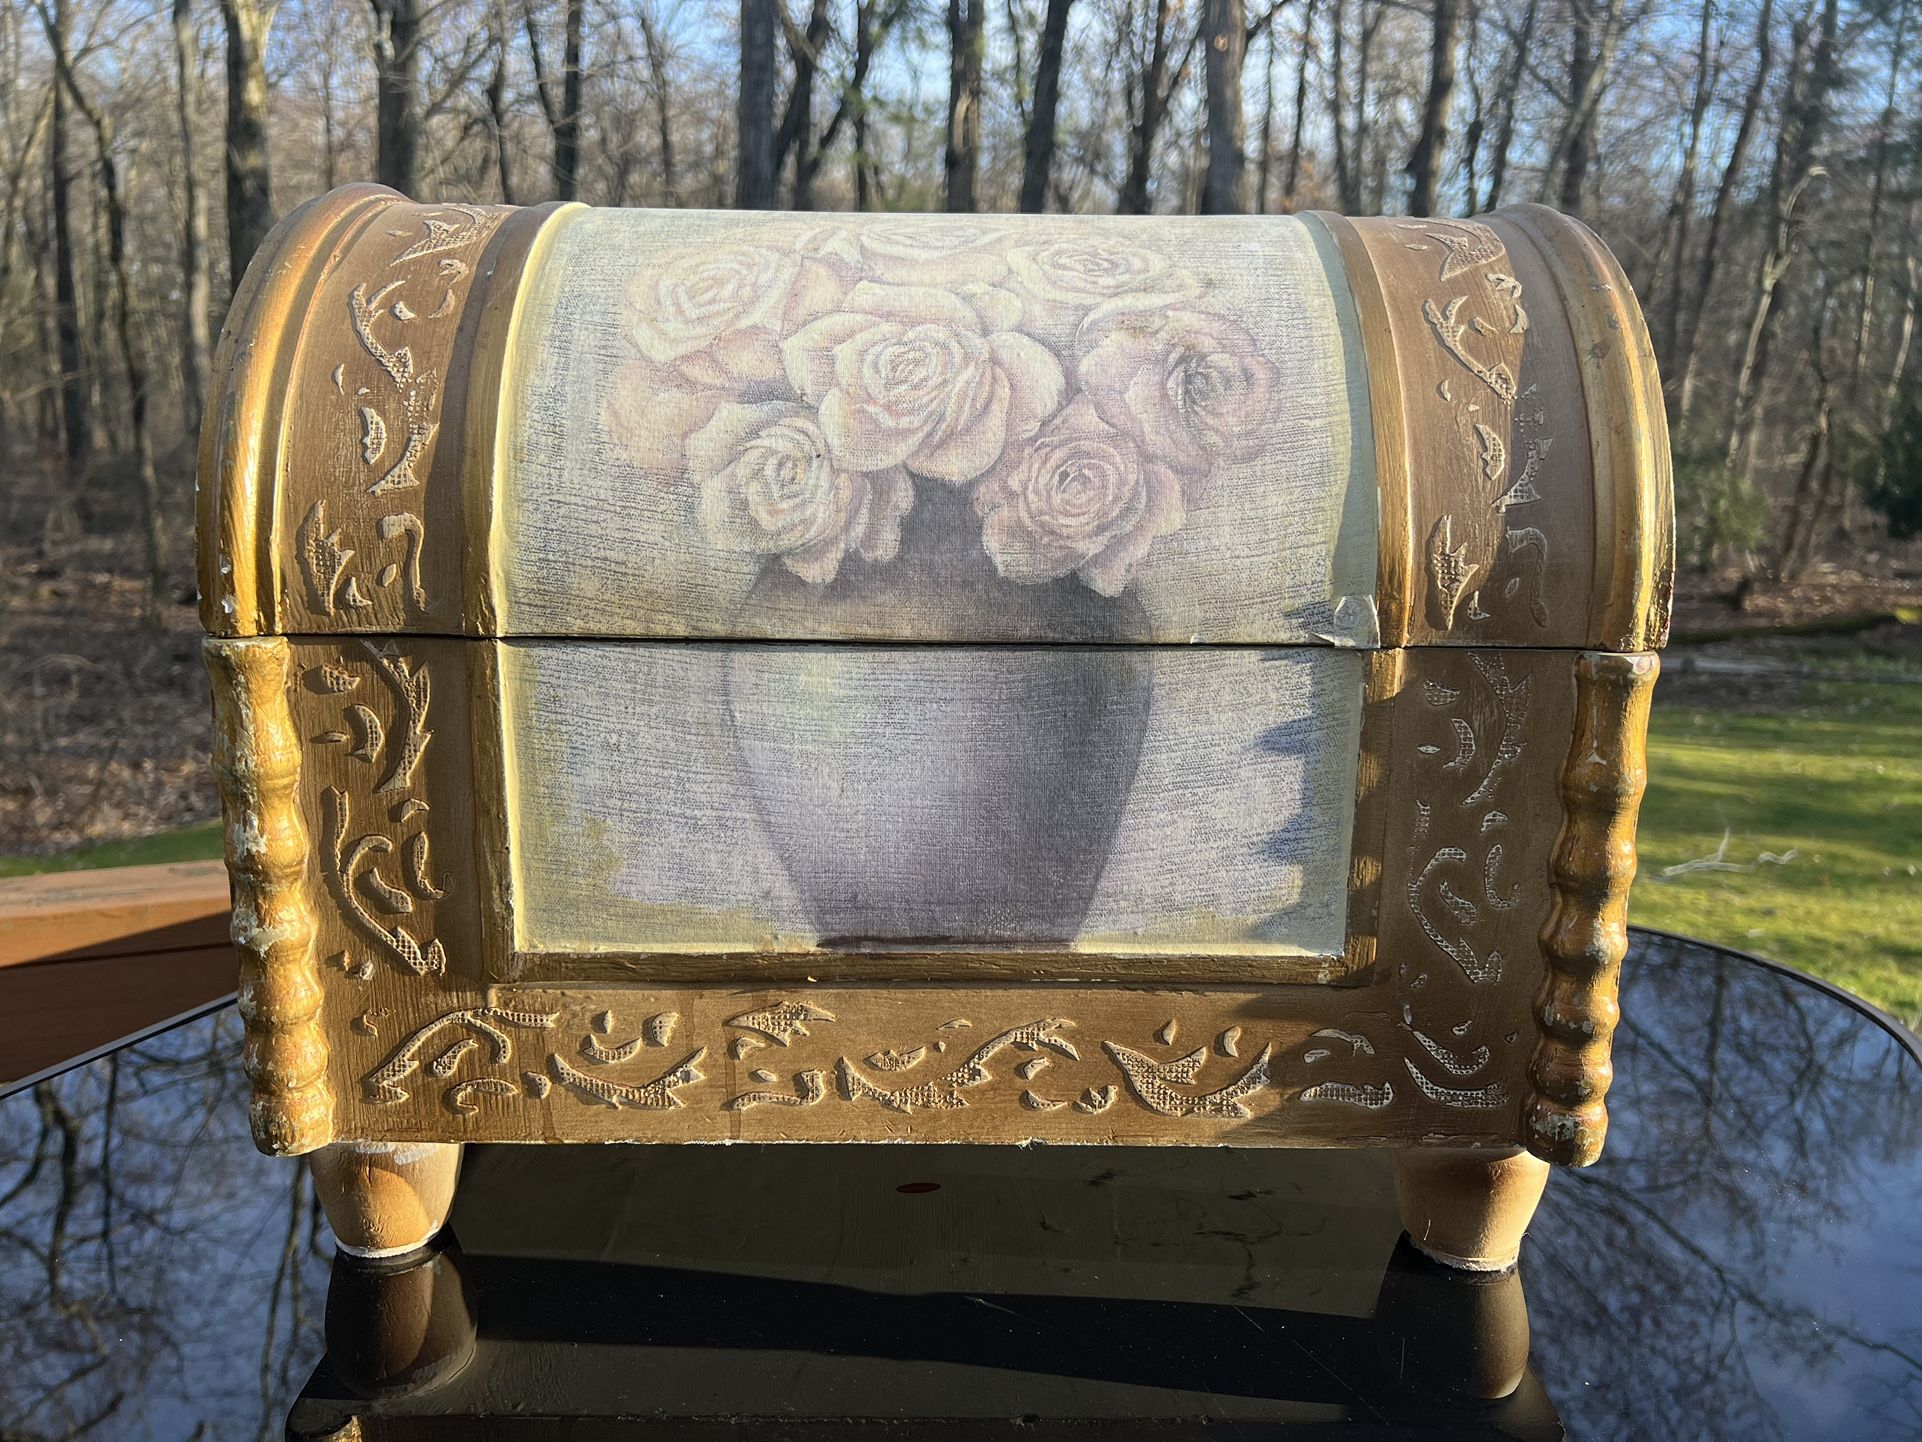 Vintage Decorator Storage Box With Flowers In A Vase